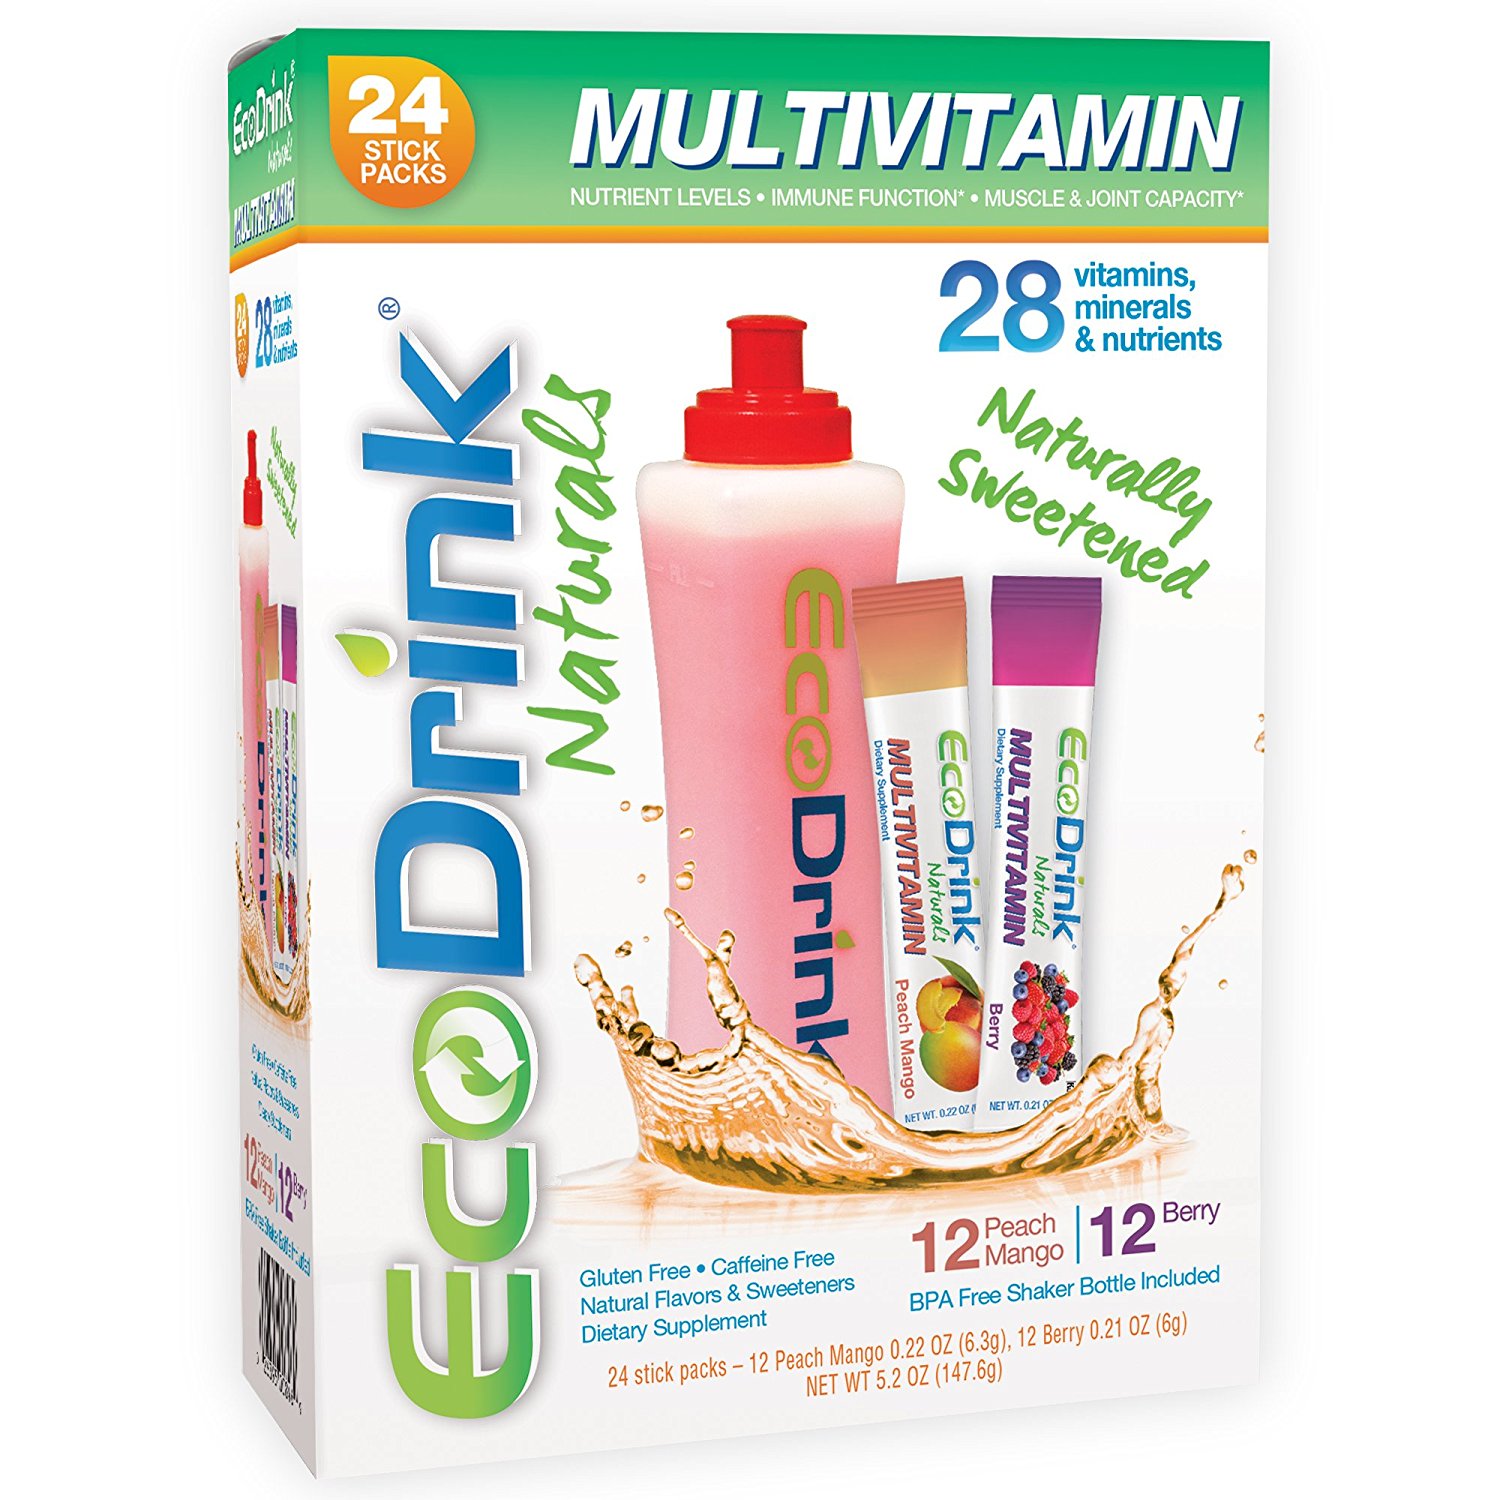 LILY OF THE DESERT NUTRITION: EcoDrink Trial Size Strawberry Lemonade Stick Packets 24 ct